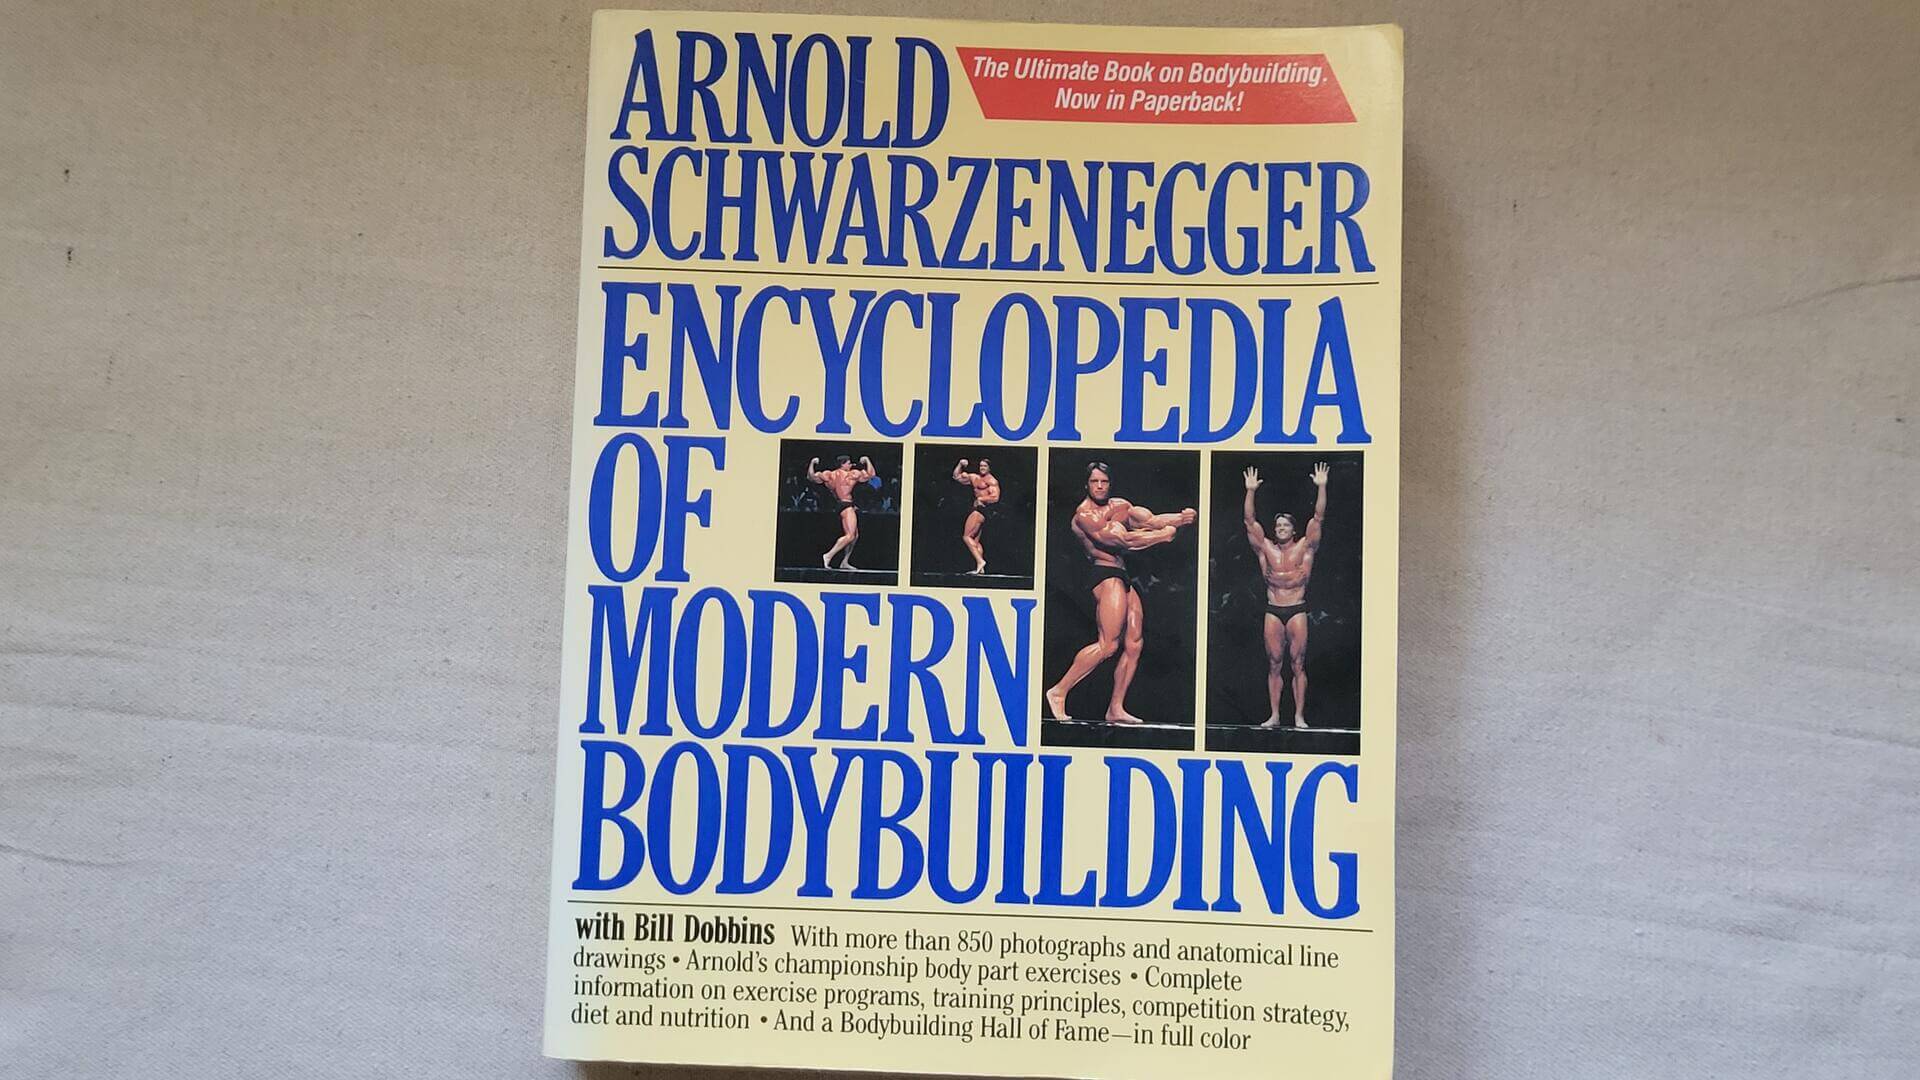 1980s vintage Encyclopedia of Modern Bodybuilding book by Arnold Schwarzenegger with Bill Dobbins. This first edition is collectible sports memorabilia and classic reference with more than 850 photographs and anatomical line drawings